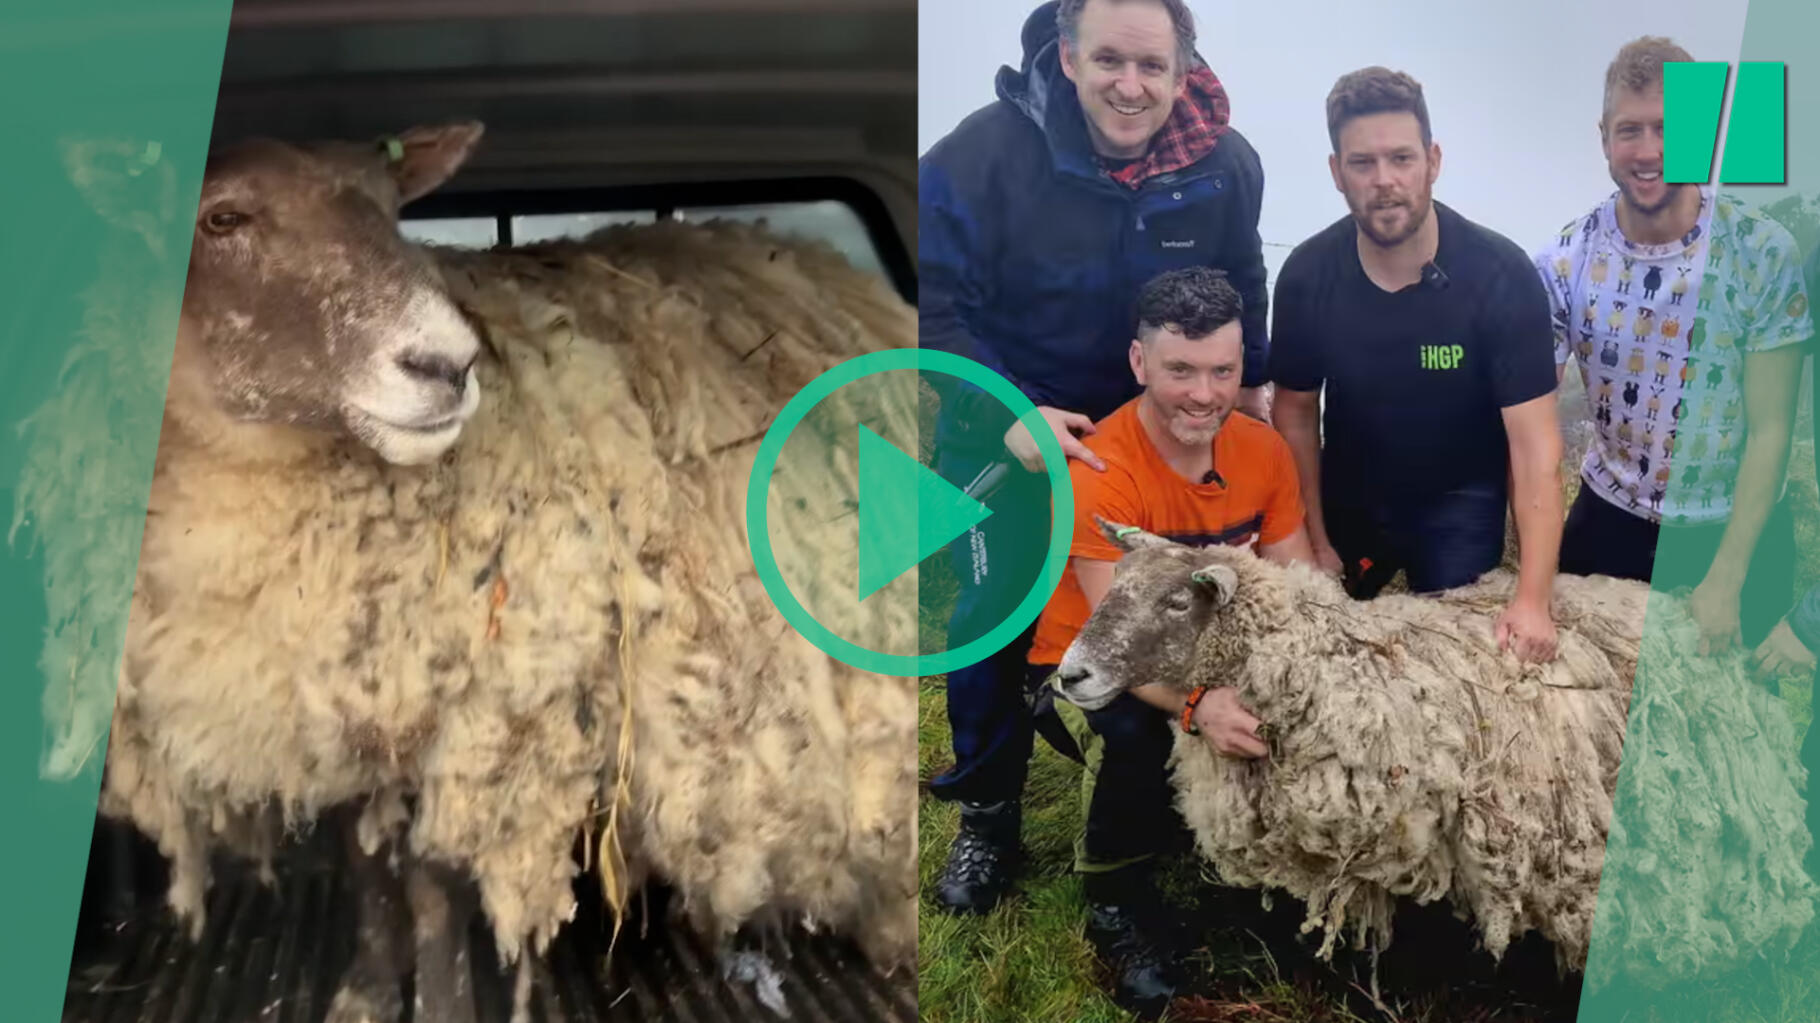 The most isolated sheep in the country has been rescued by farmers, in a controversial rescue